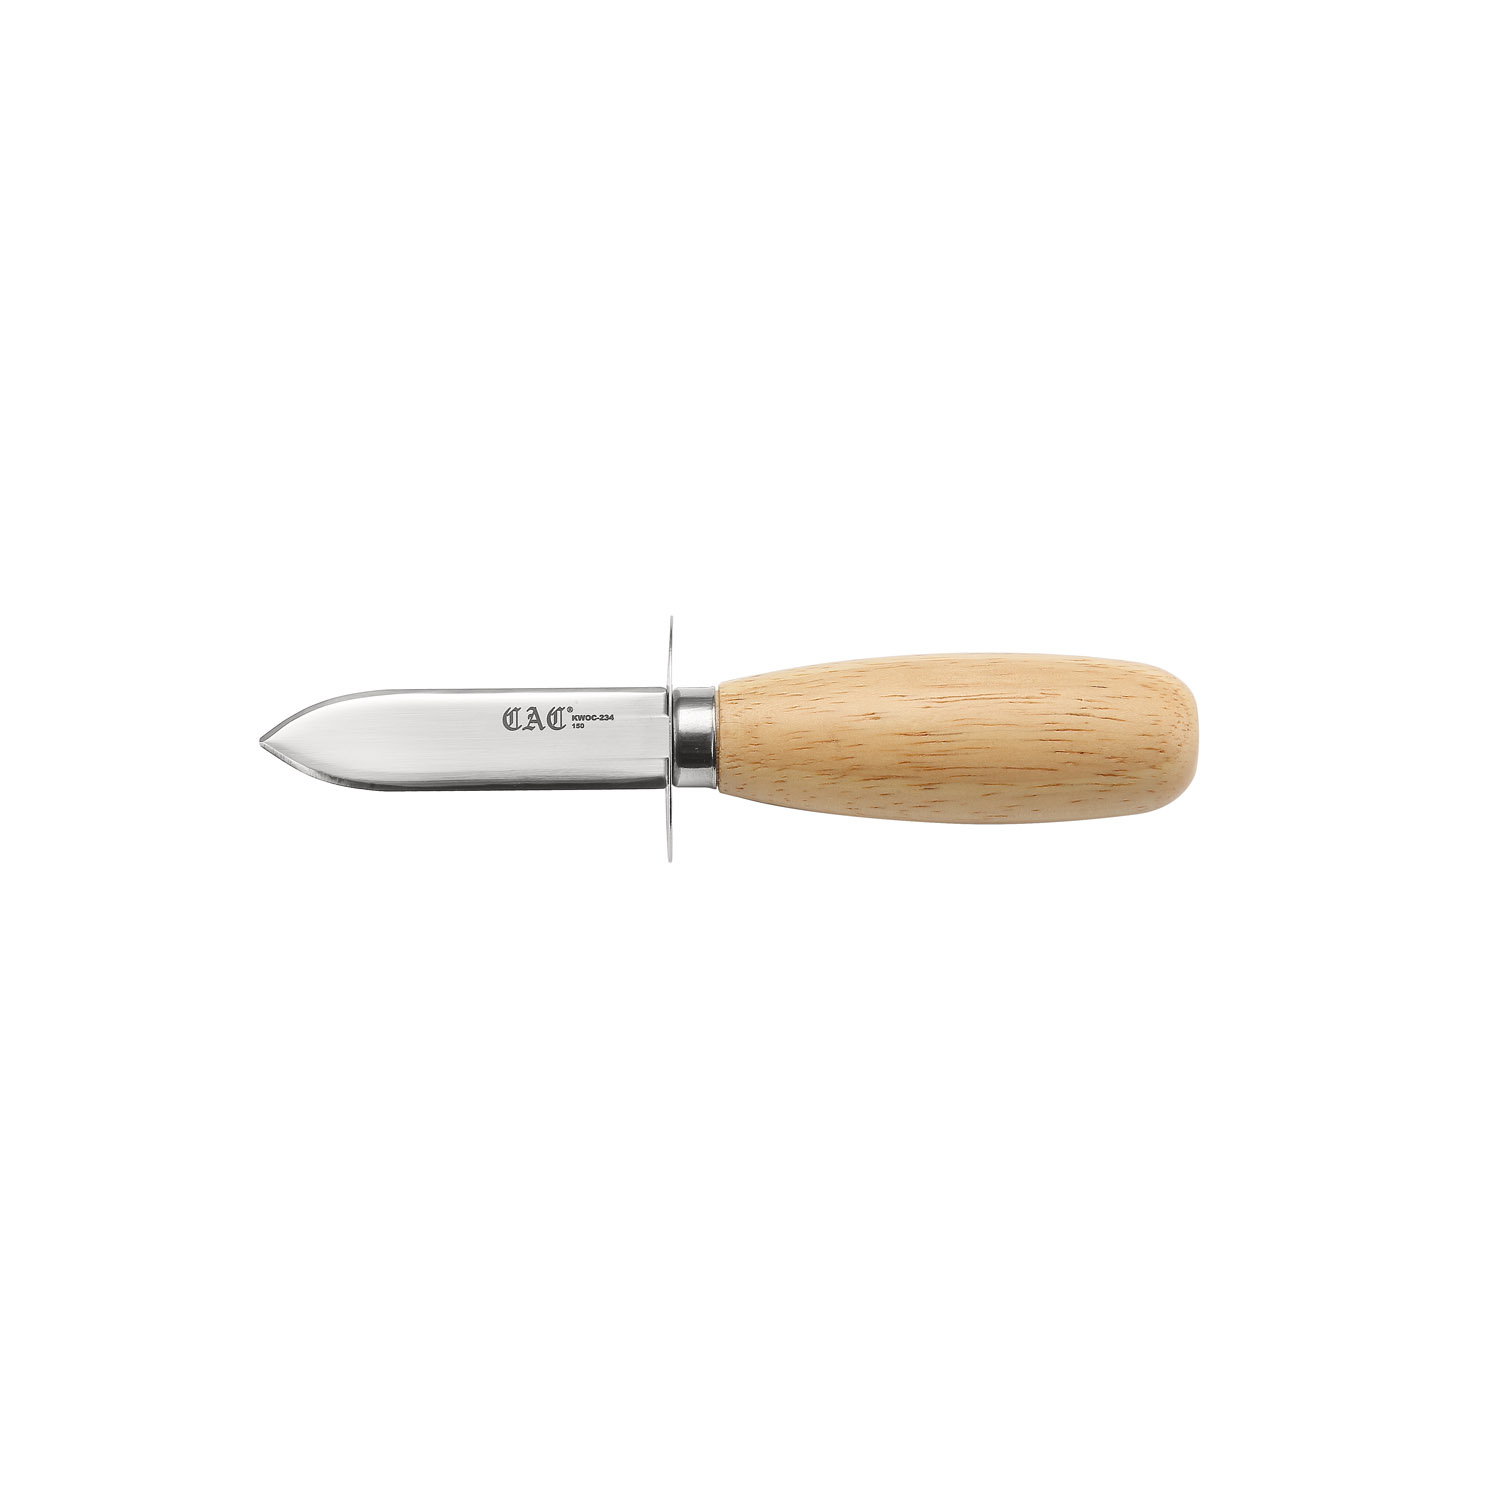 CAC China KWOC-234 Oyster/Clam Knife with Pointed Tip and Wooden Handle 2-3/4"